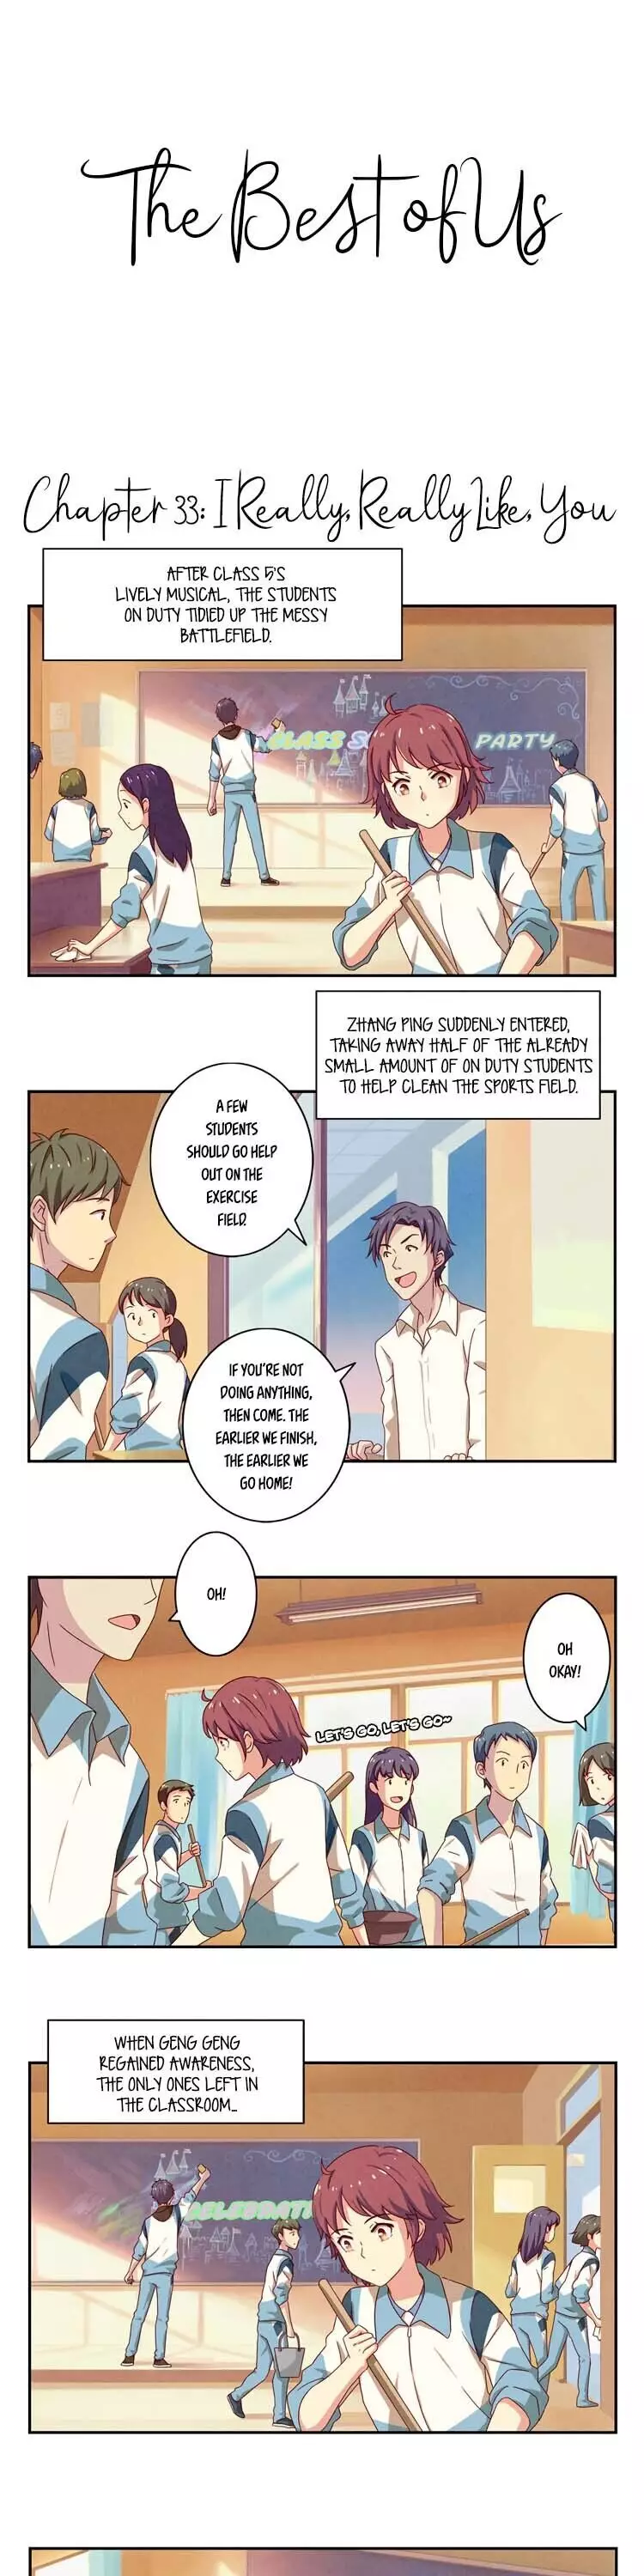 The Best Of Us - 33 page 2